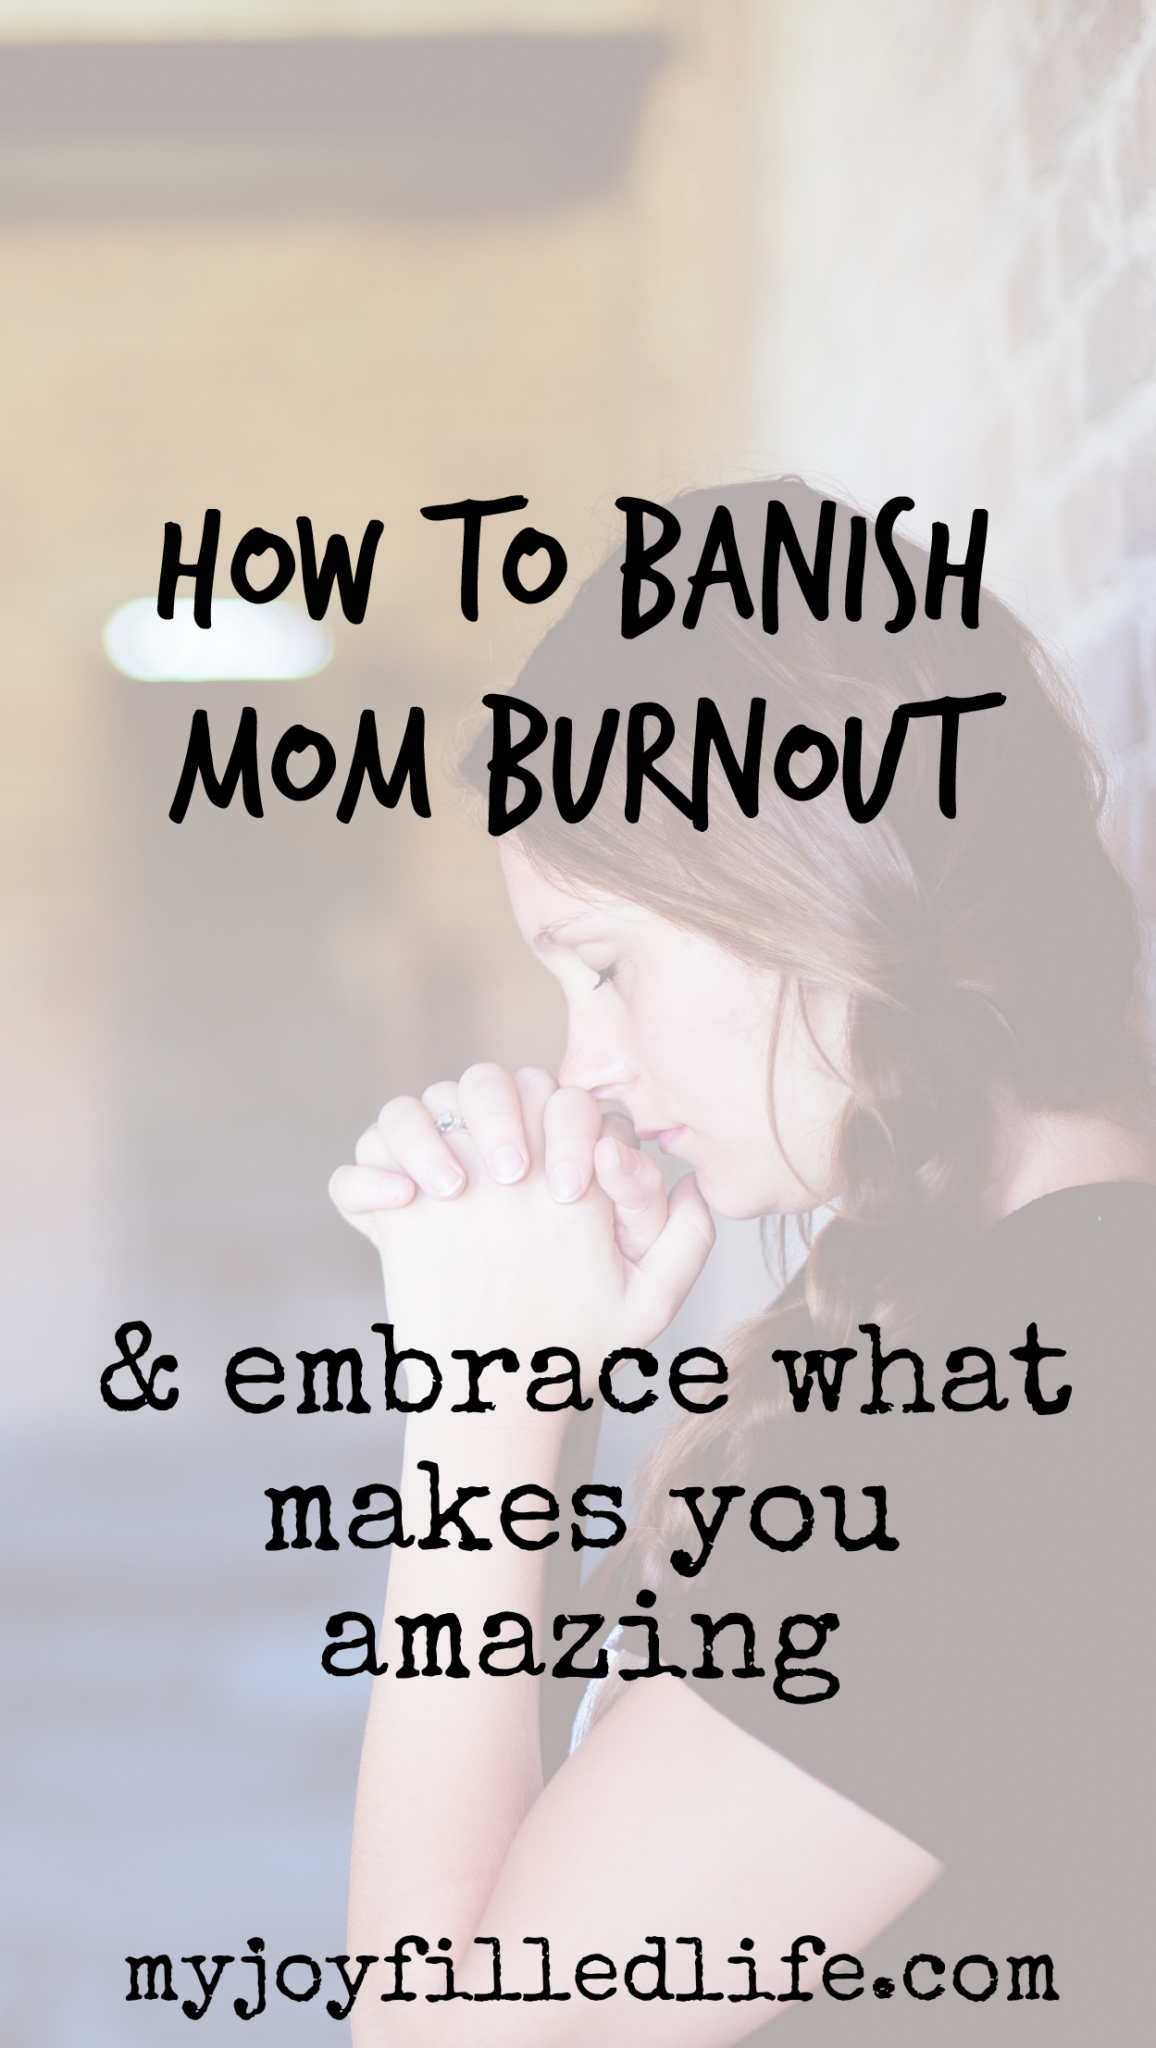 How To Banish Mom Burnout & Embrace What Makes You Amazing